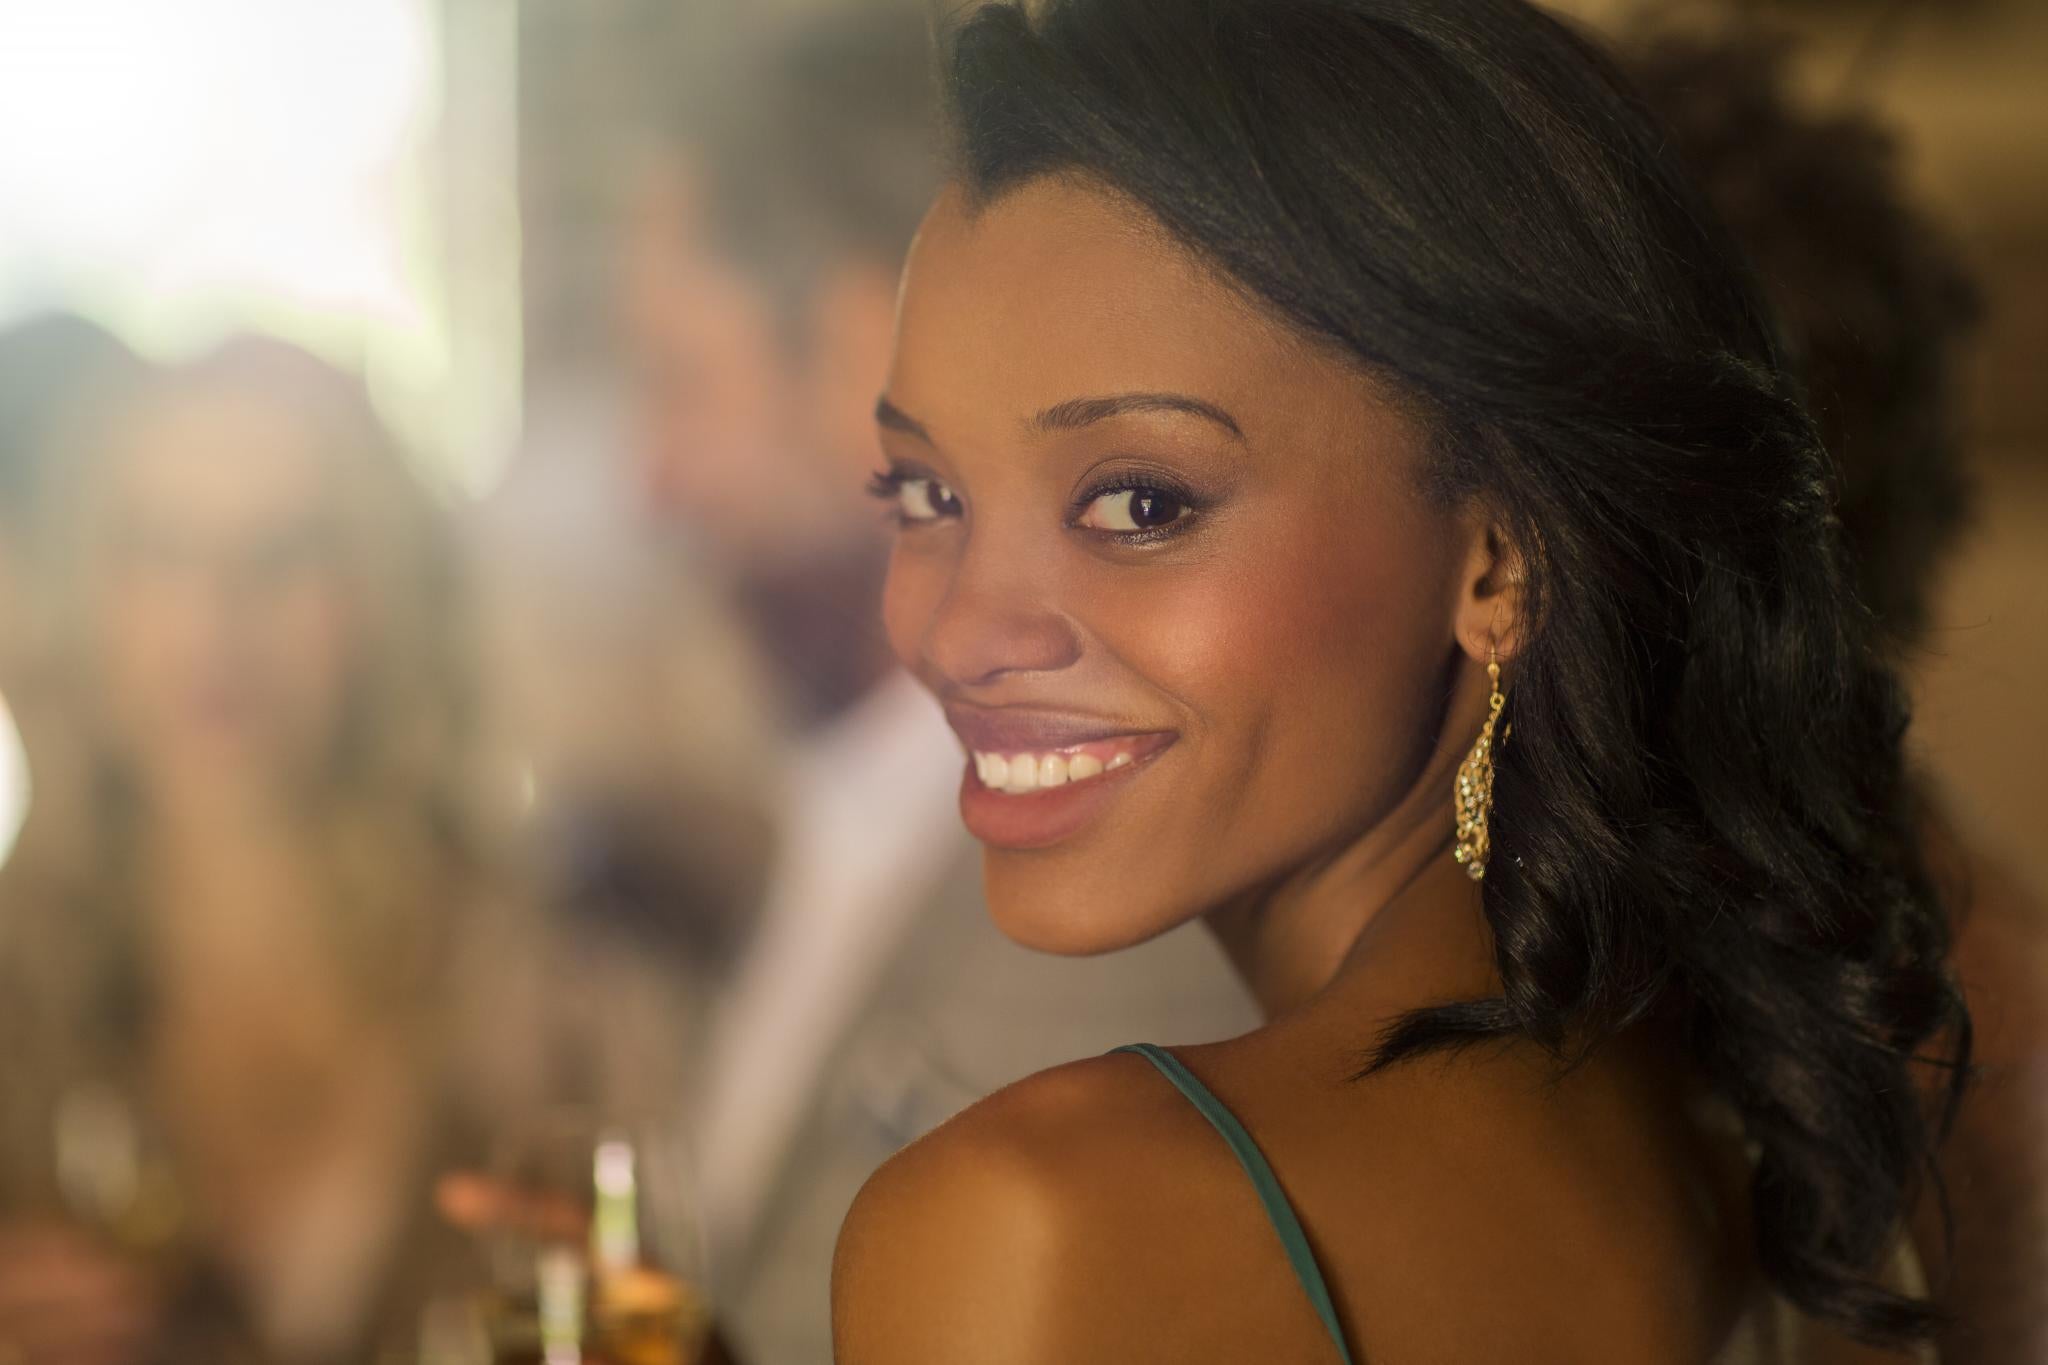 Last Minute Tips And Tricks To Reset Your Skin For Your Big Day